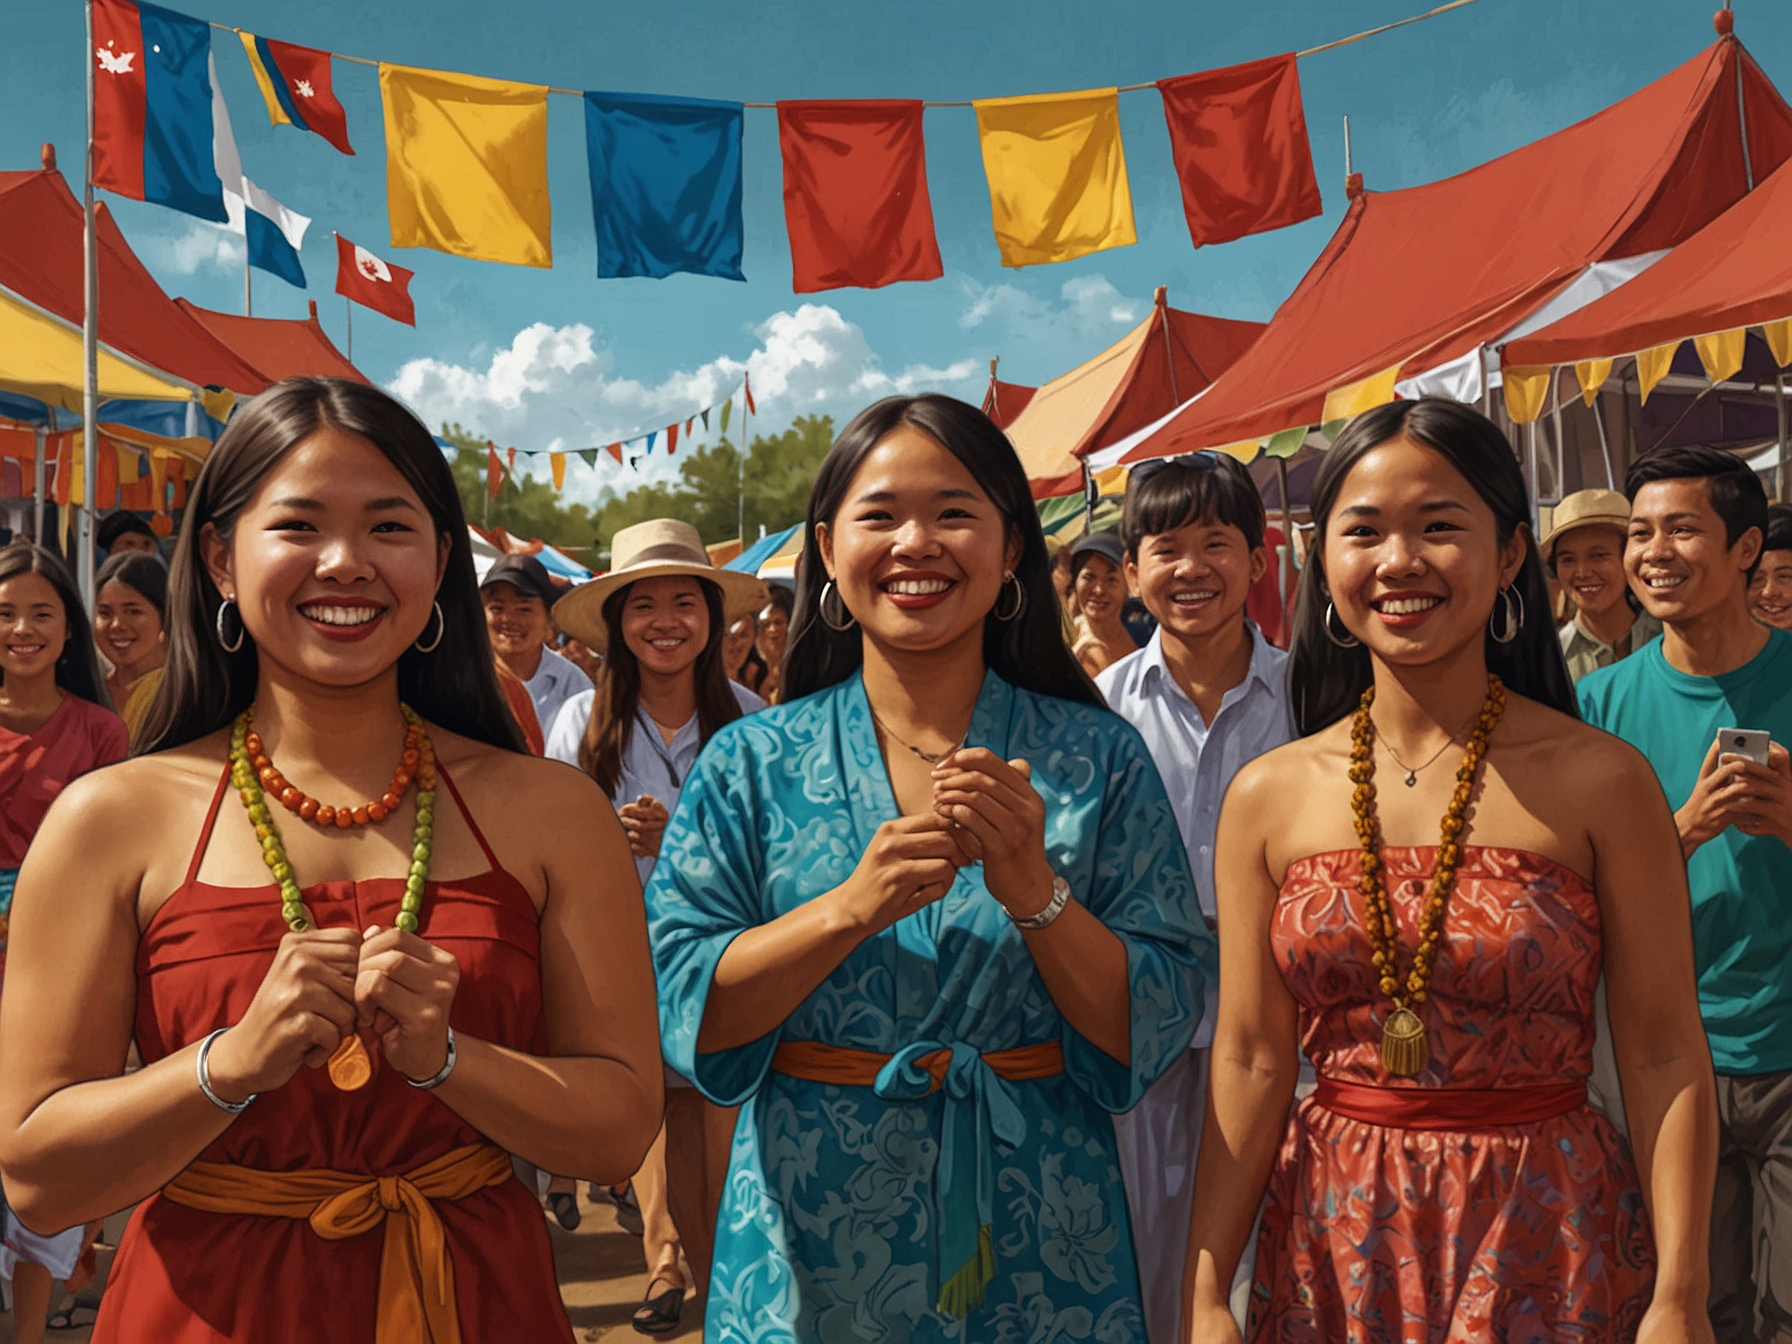 A photo capturing a vibrant Filipino festival in Canada, showcasing cultural exchange and the Filipino community's contributions to Canadian multiculturalism.